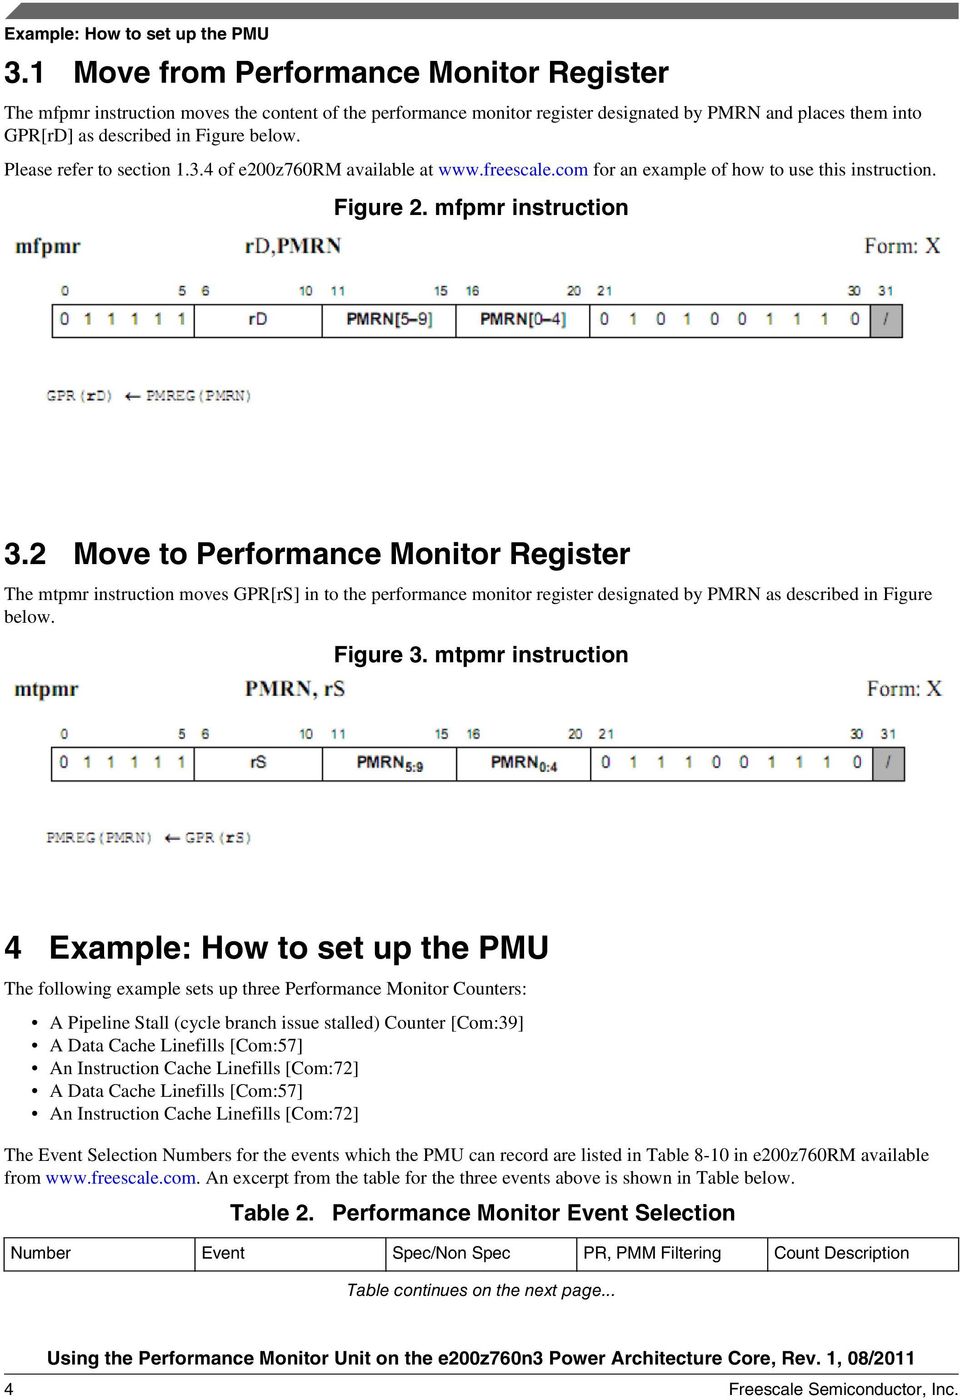 Please refer to section 1.3.4 of e200z760rm available at www.freescale.com for an example of how to use this instruction. Figure 2. mfpmr instruction 3.